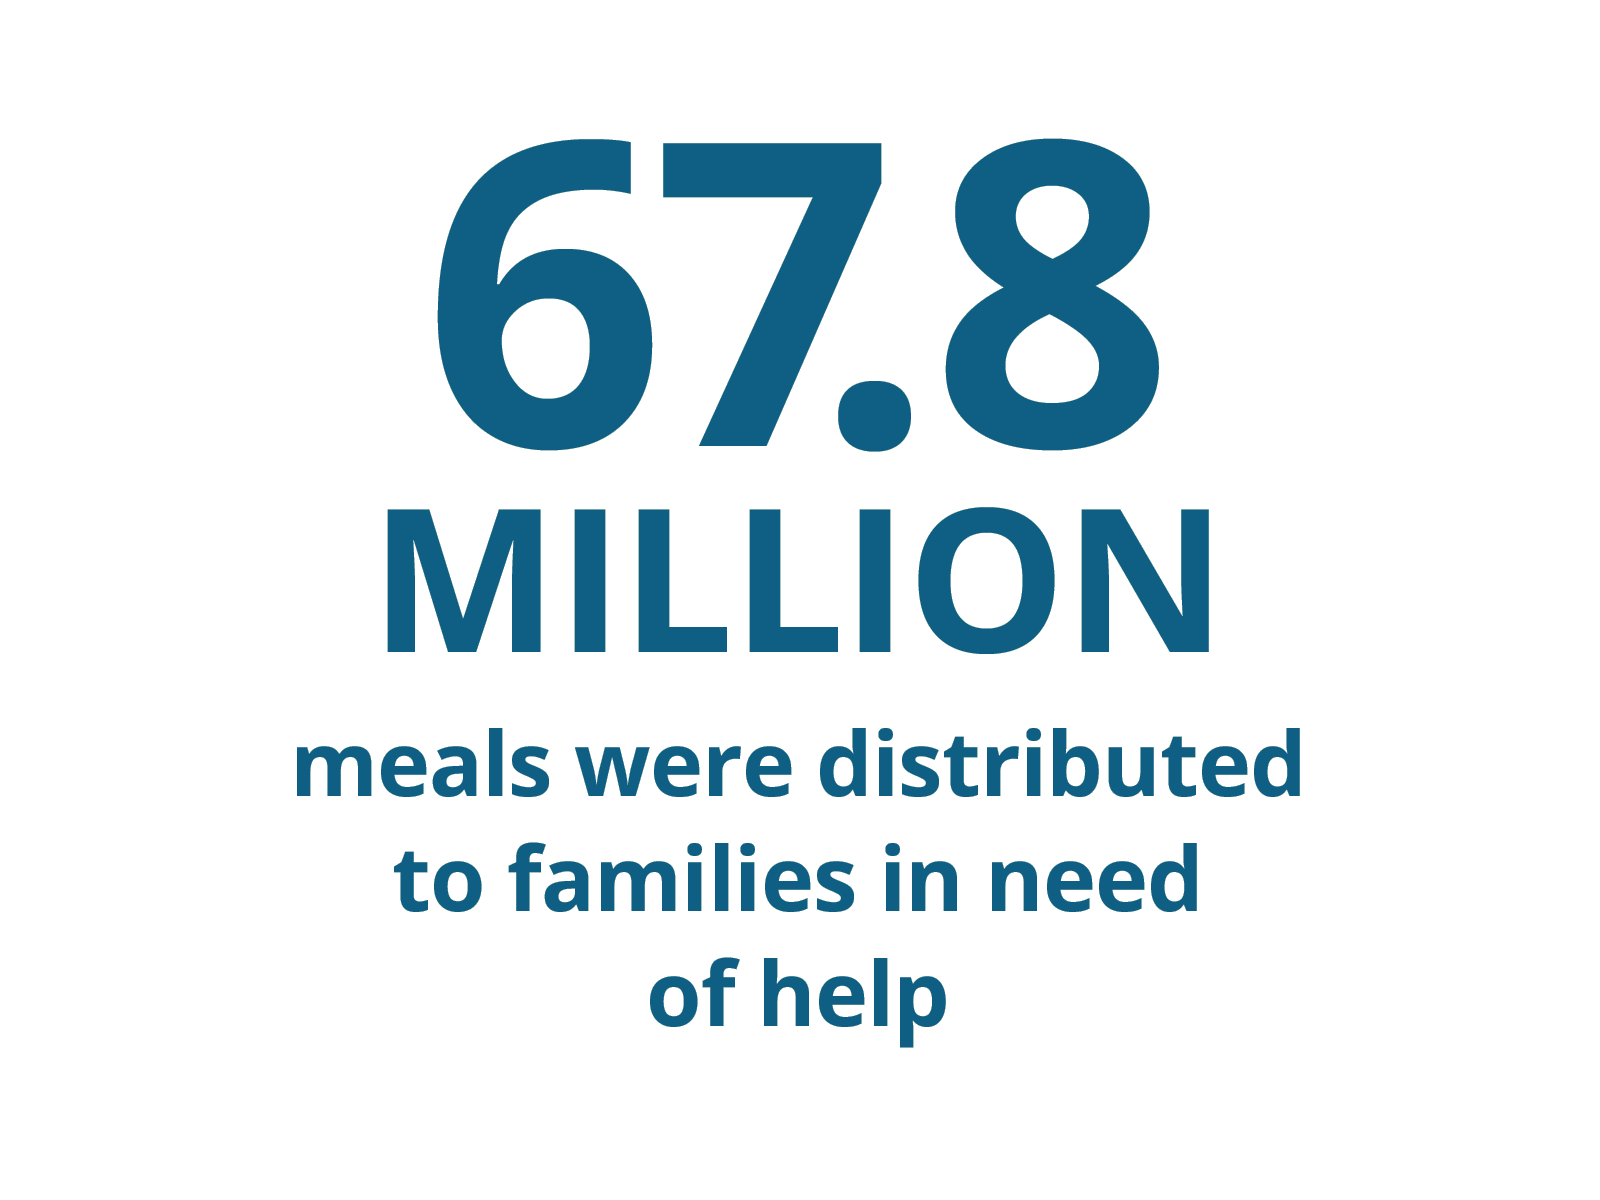 67.8 million meals were distributed to families in need of help